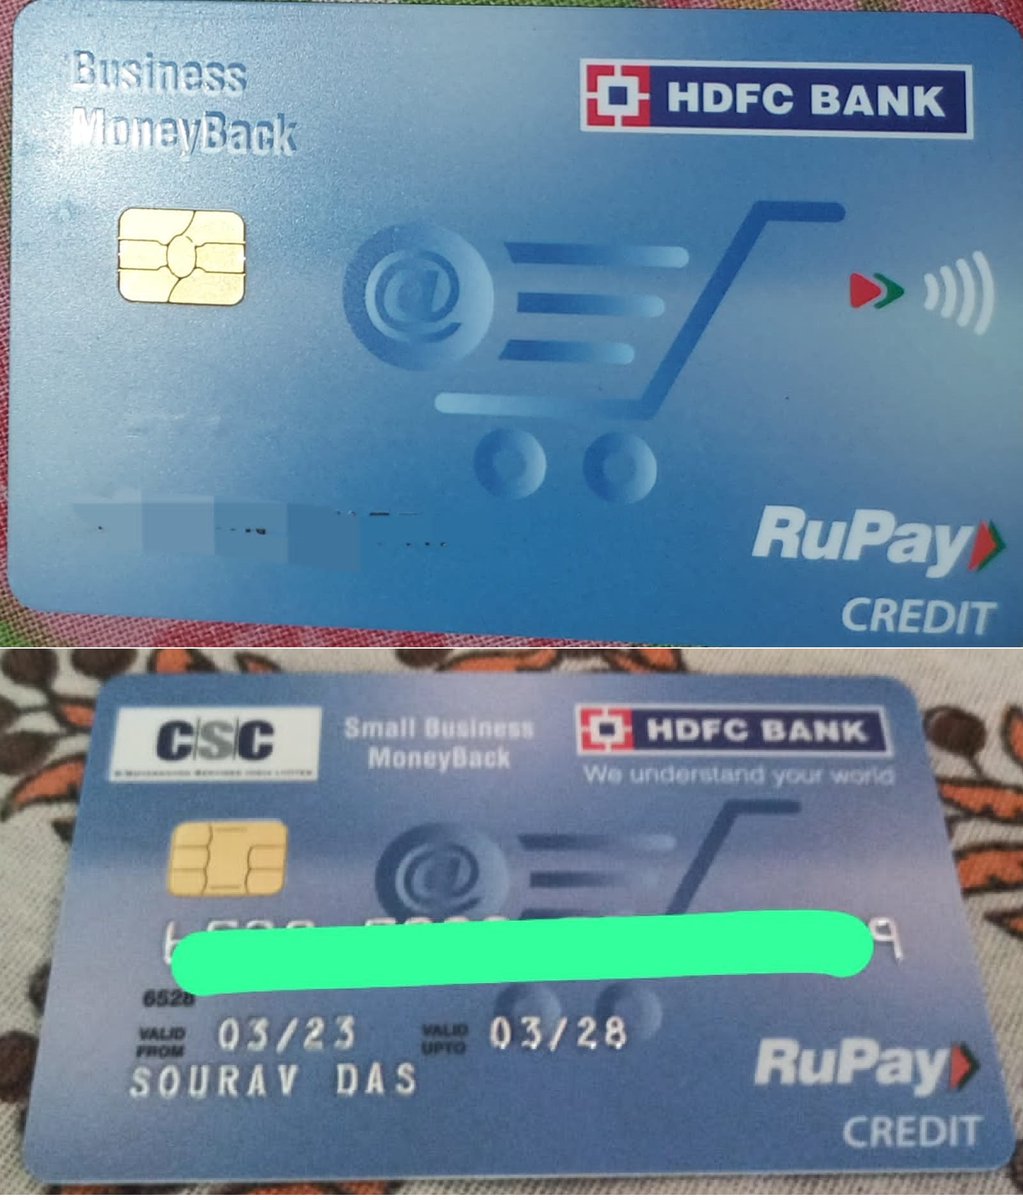 HDFC launch Business Moneyback RuPay credit card and (CSC) Small Business Moneyback RuPay Credit Card

Both Business Moneyback variant card now live on Rupay and use for UPI payment.

@TechnoFino @CardMavenIn @ankurmittal @creditcardz_in @ChargePlate_in #ccgeek